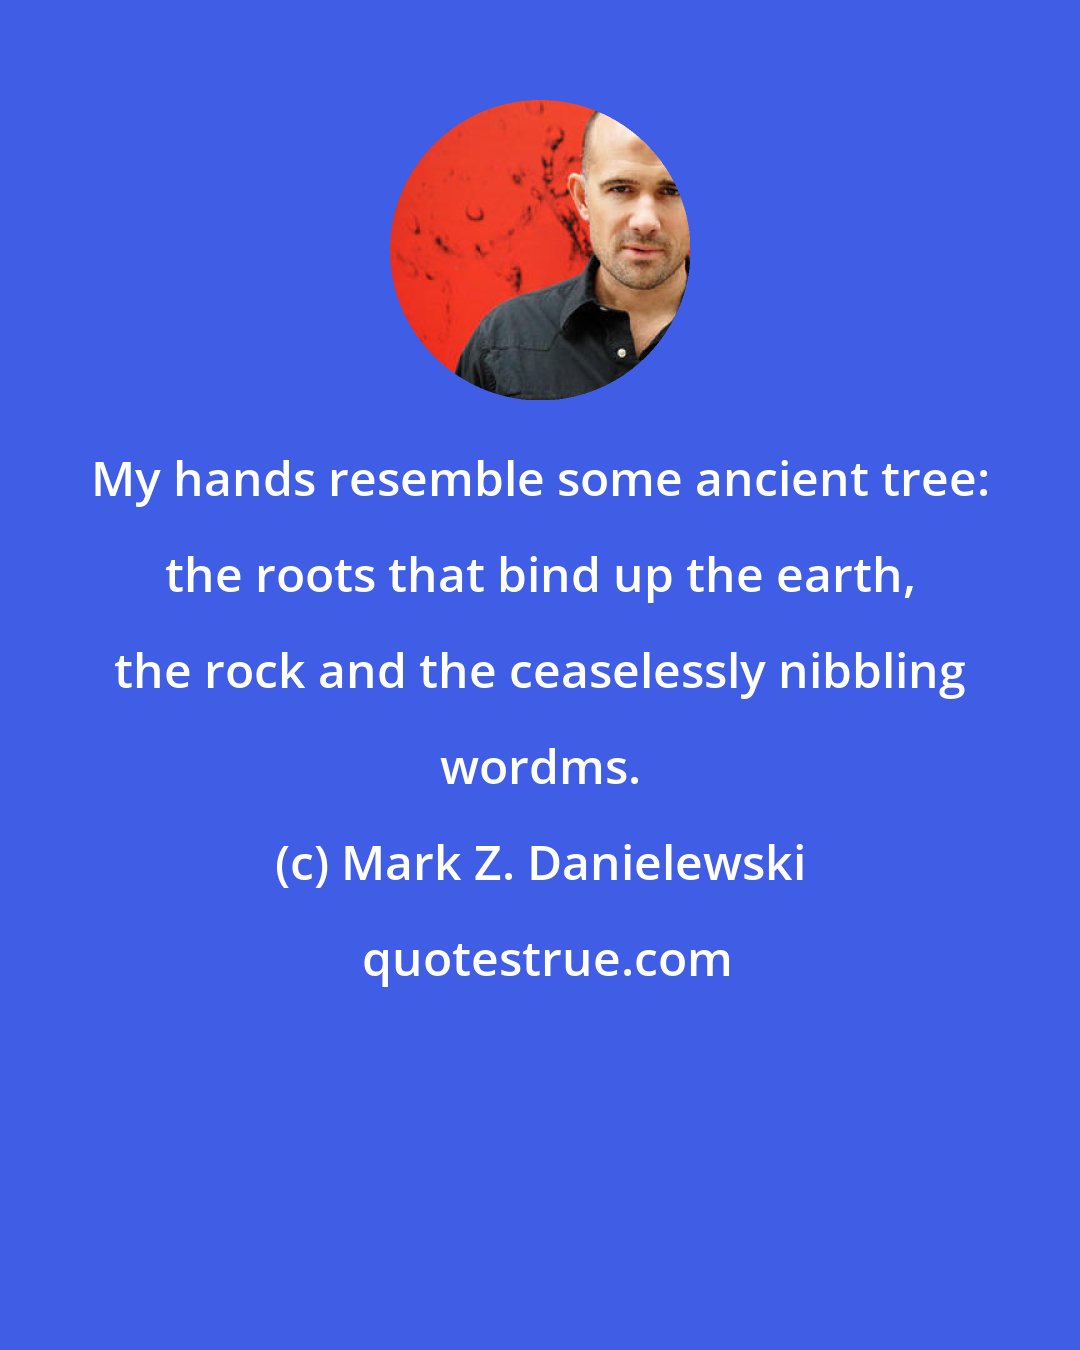 Mark Z. Danielewski: My hands resemble some ancient tree: the roots that bind up the earth, the rock and the ceaselessly nibbling wordms.